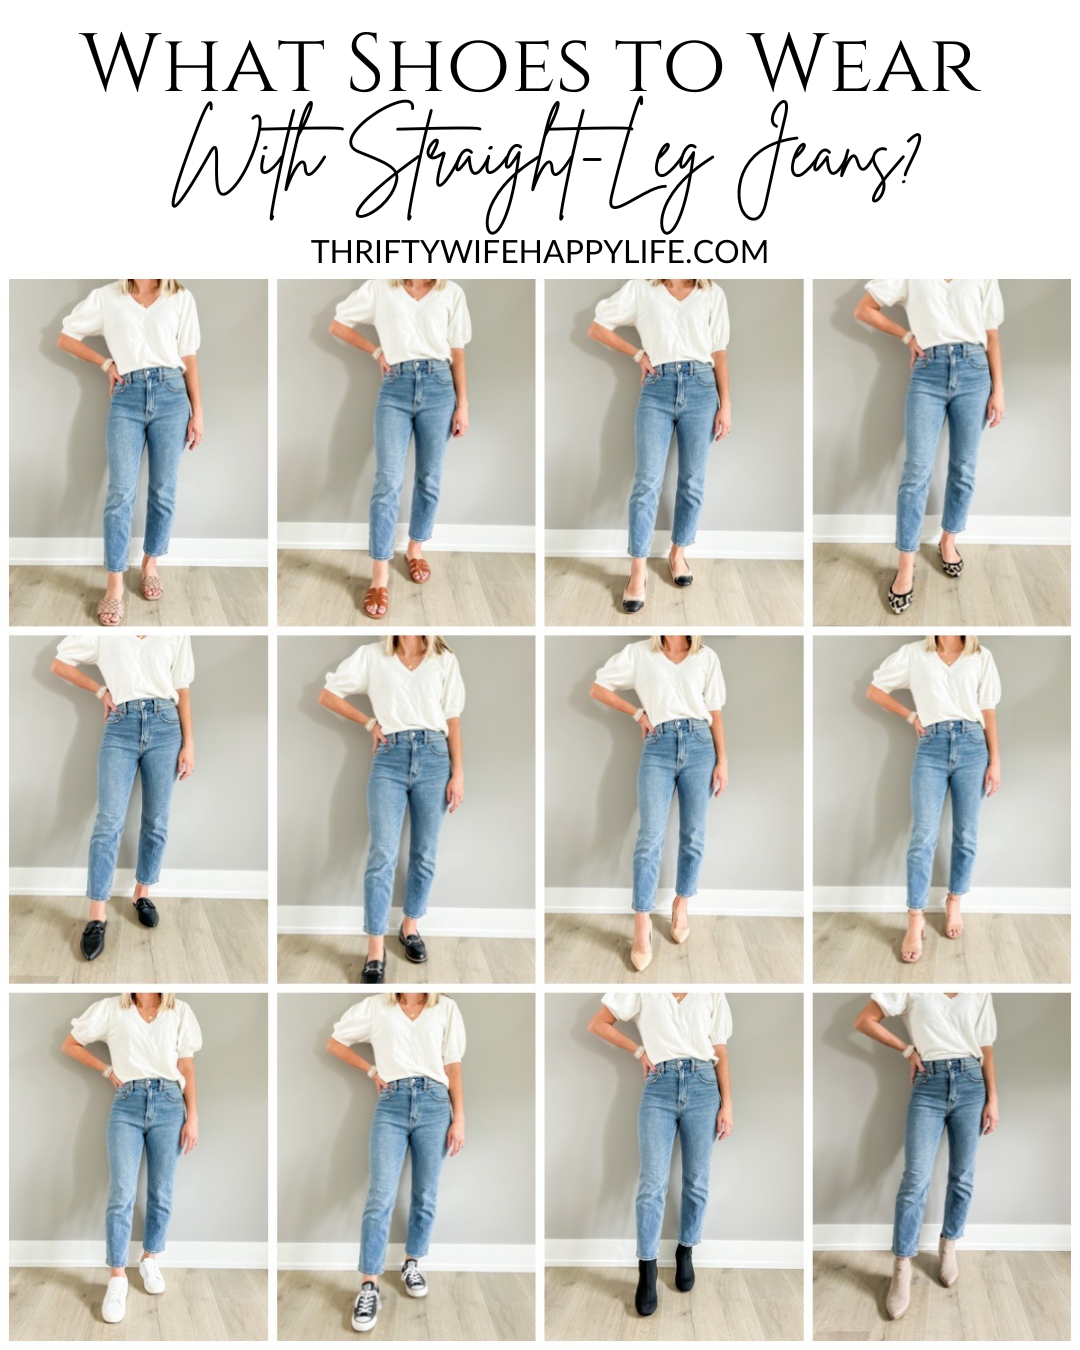 What Shoes to Wear With Straight Leg Jeans? - Thrifty Wife Happy Life